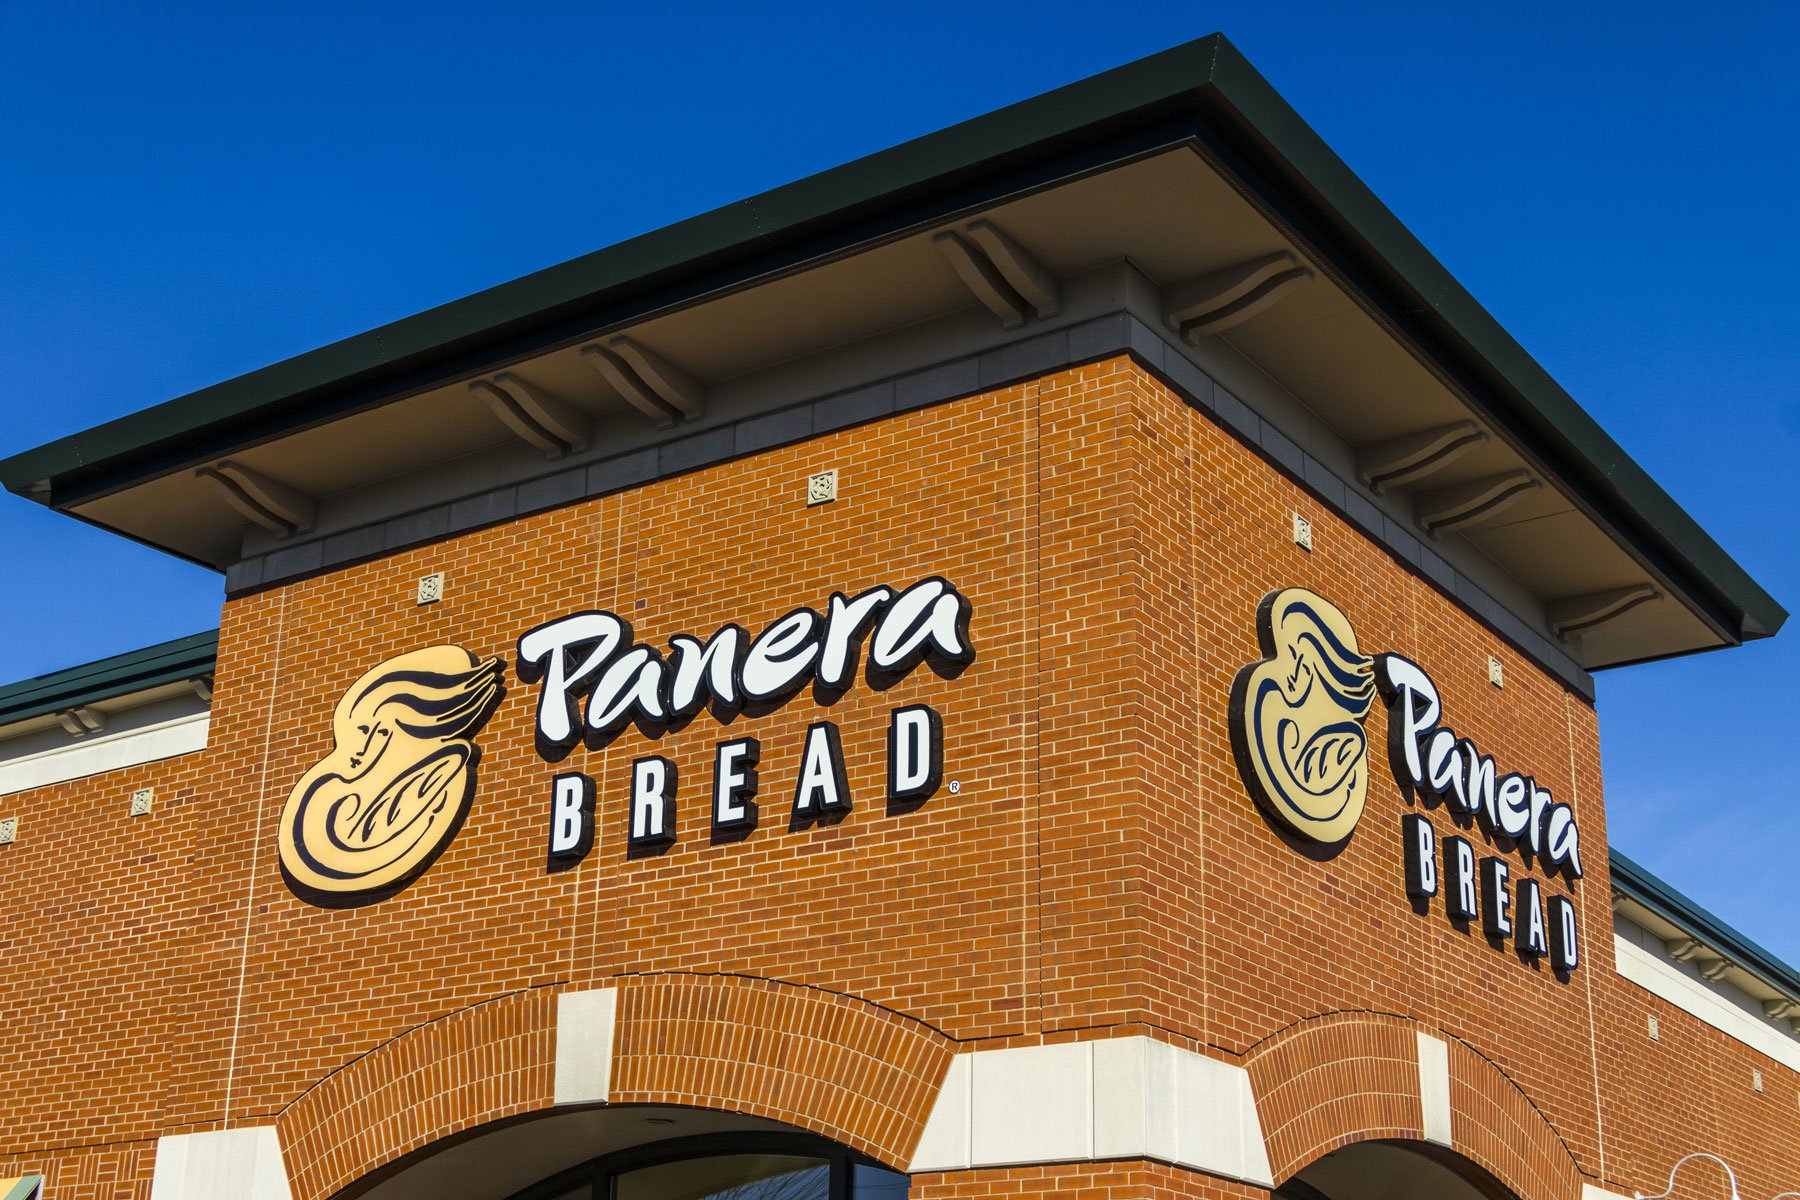 Panera To Print Calories, Added Sugar Info On Its Fountaindrink Cups